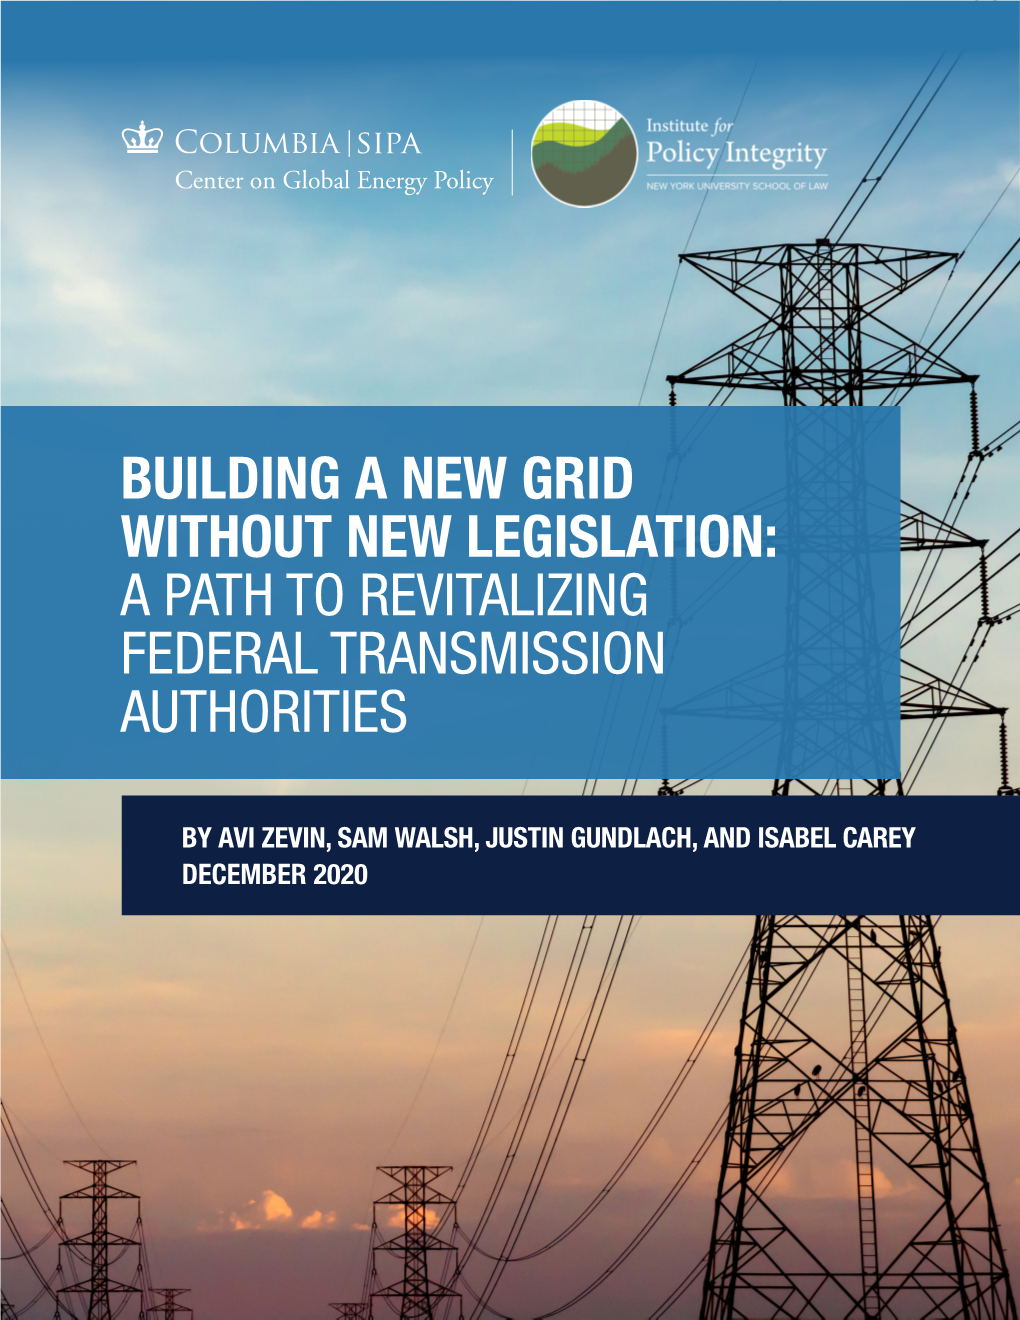 Building a New Grid Without New Legislation: a Path to Revitalizing Federal Transmission Authorities